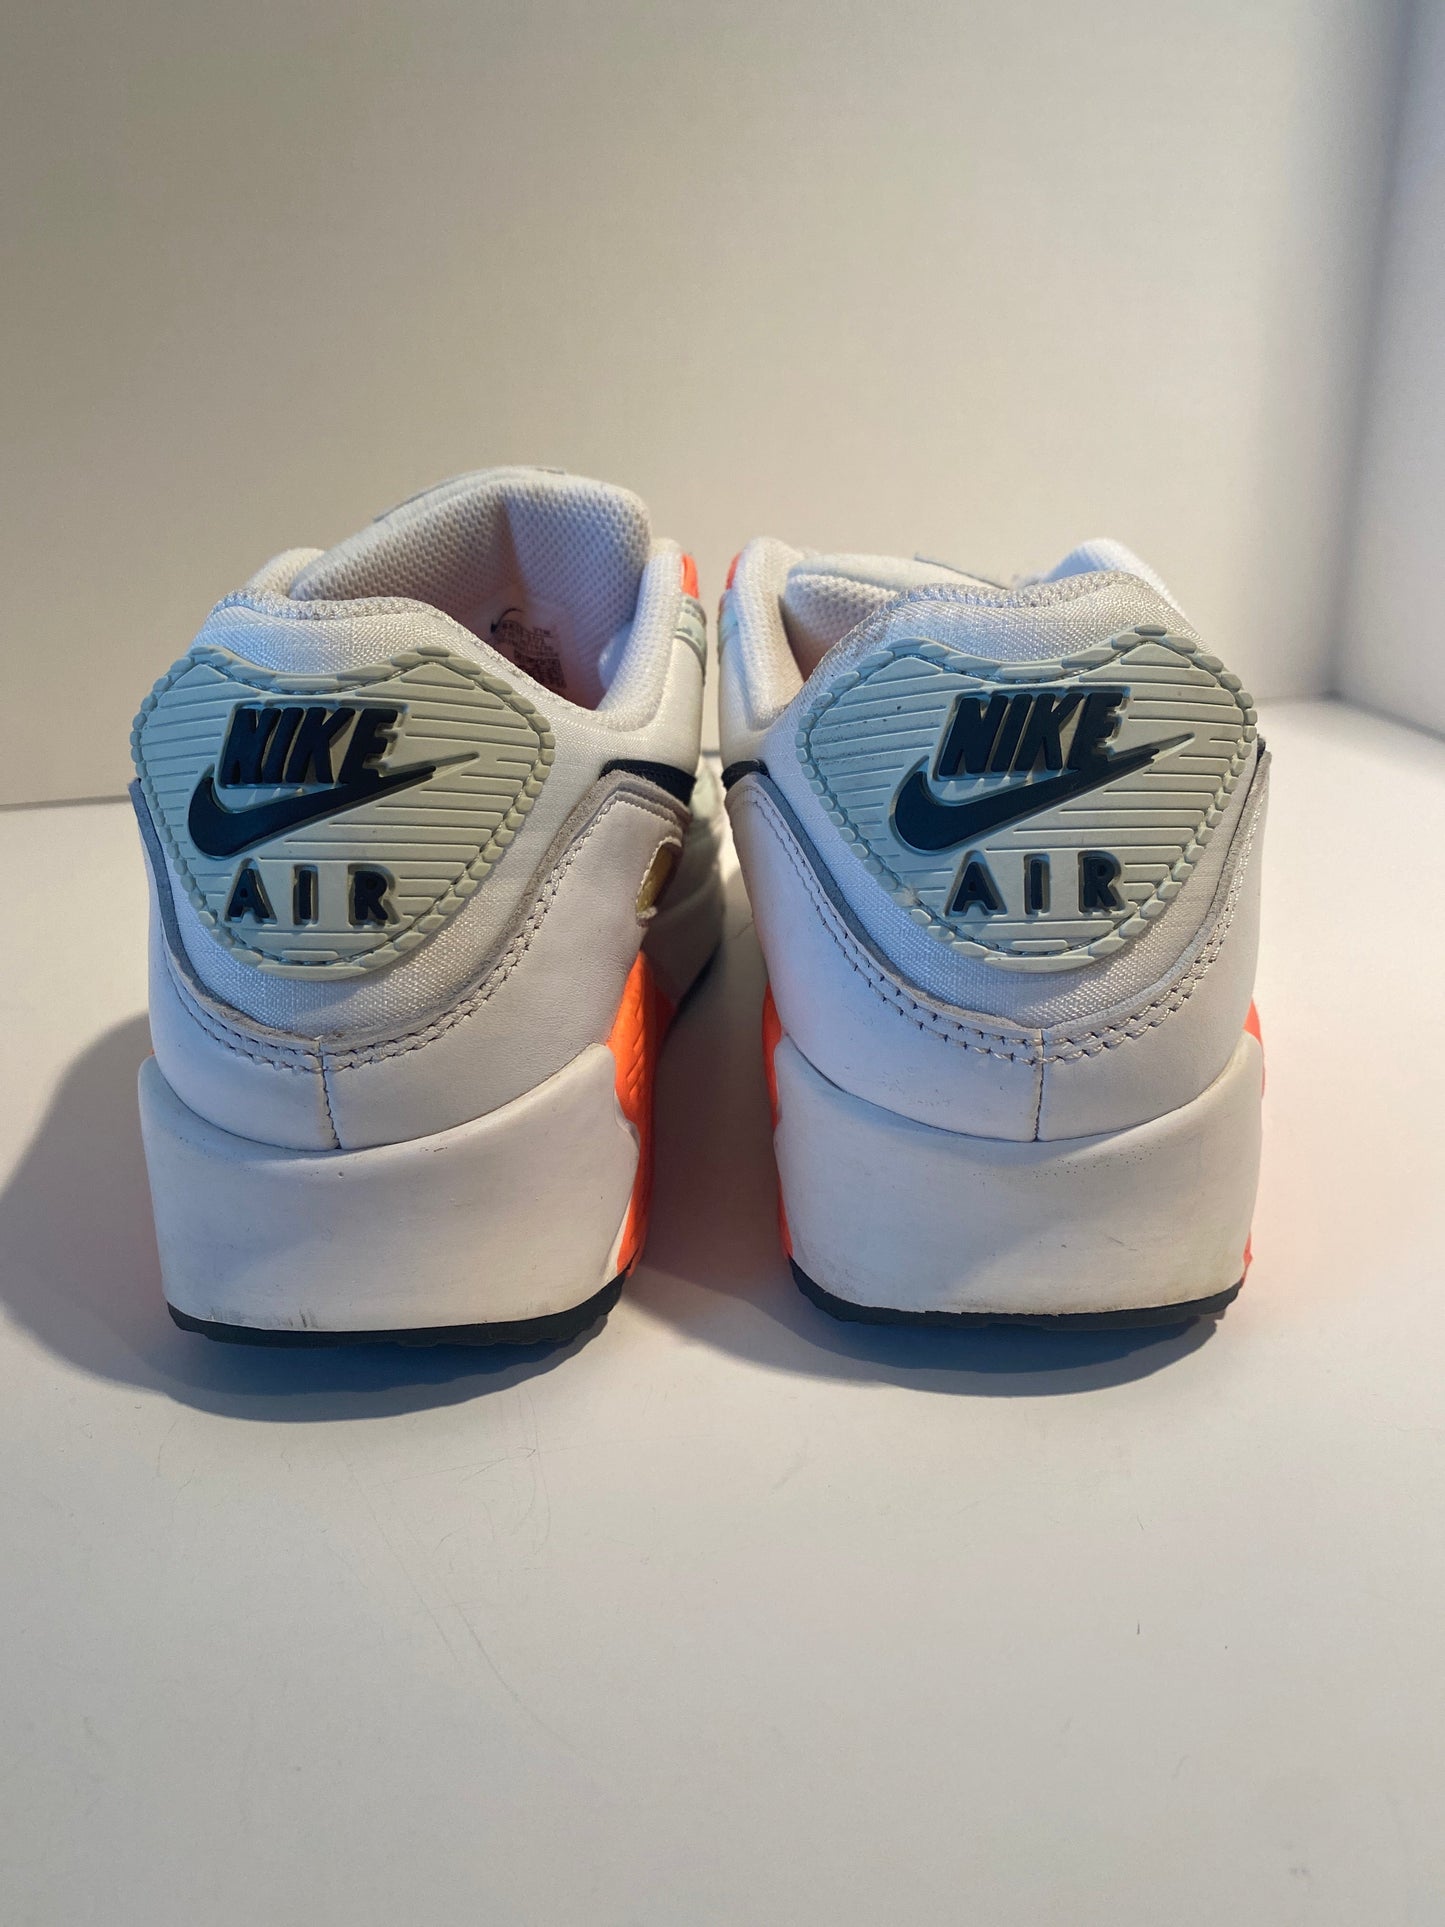 Shoes Sneakers By Nike  Size: 8